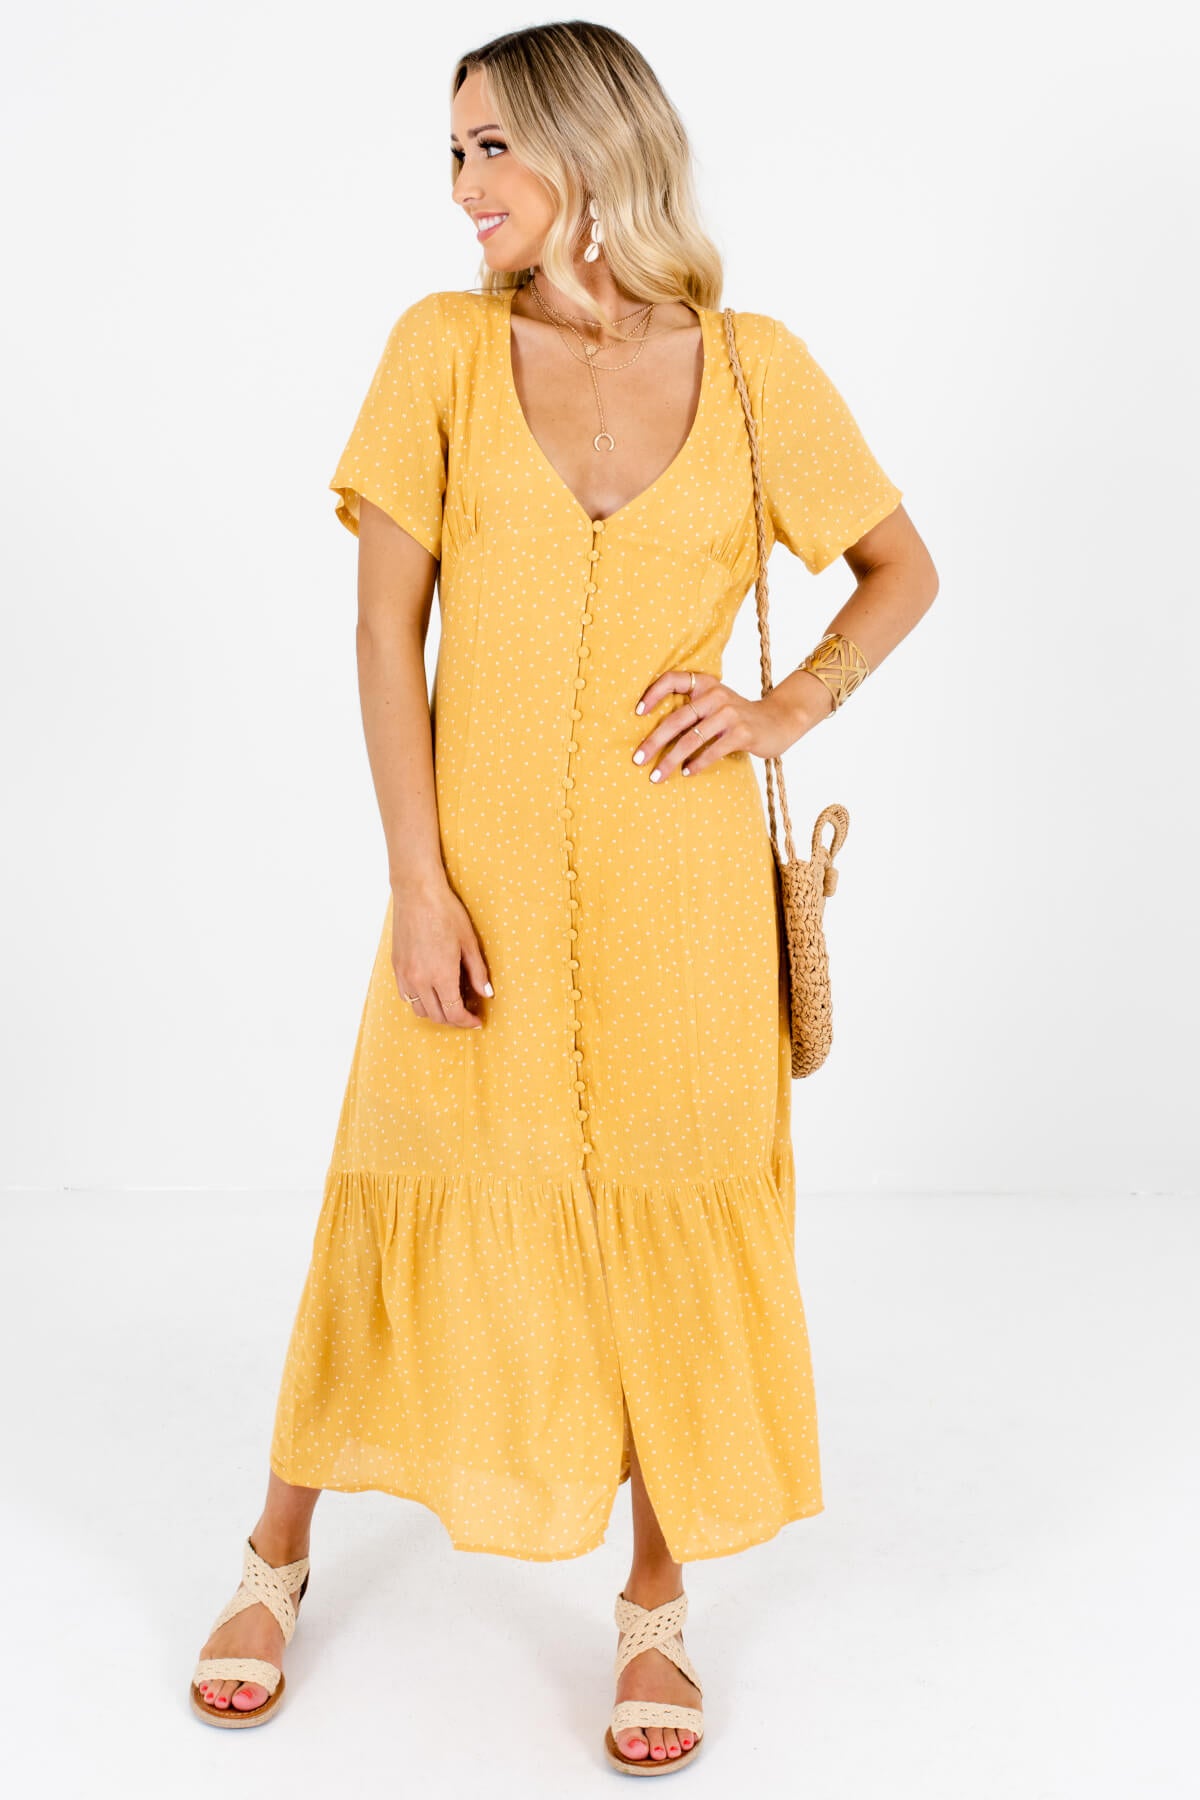 Yellow White Polka Dot Maxi Dresses Affordable Online Boutique